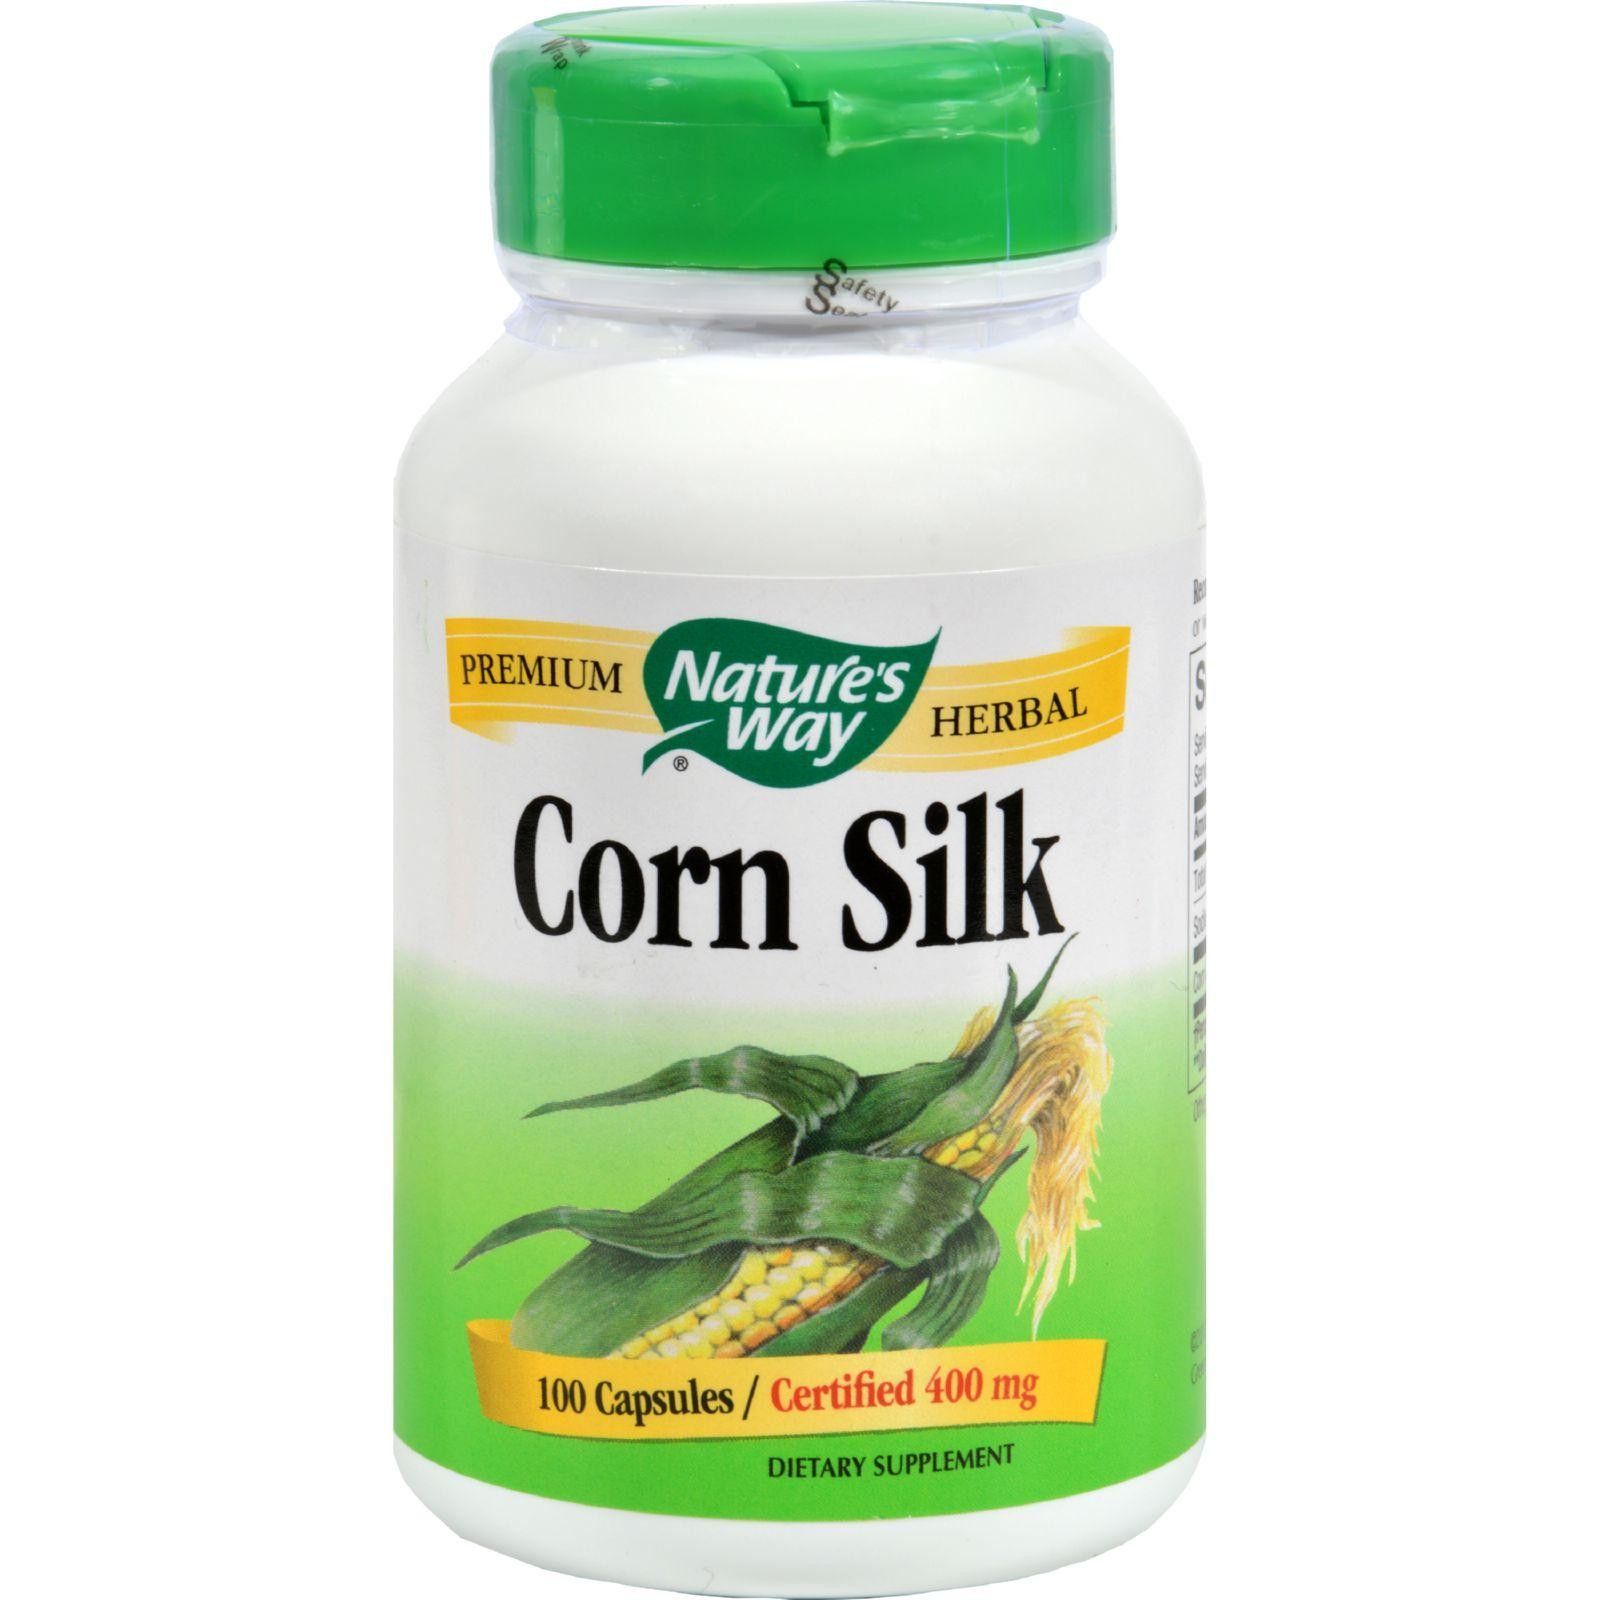 The Comprehensive Guide to the Benefits of Corn Silk Supplements